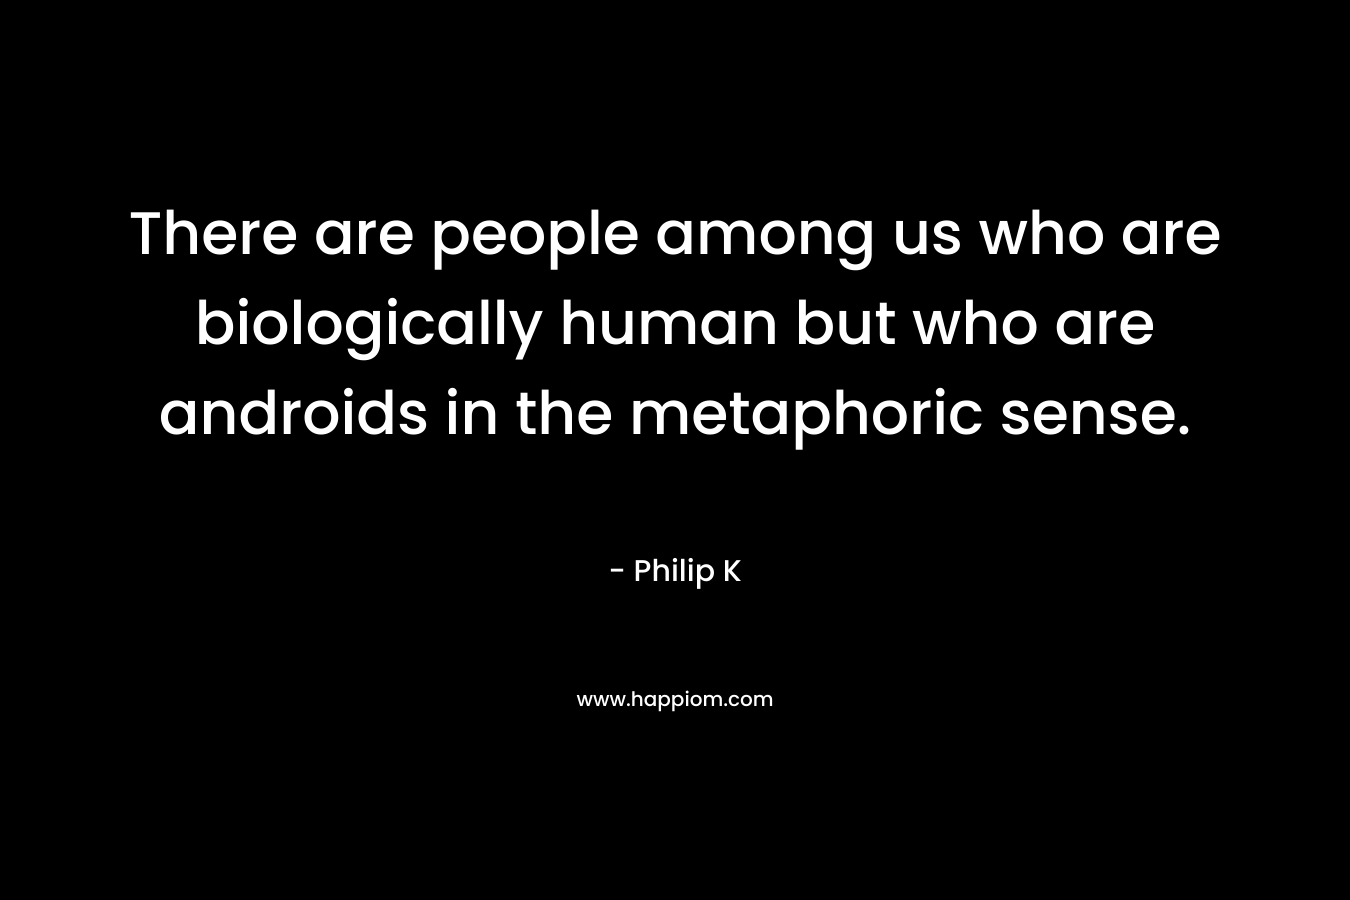 There are people among us who are biologically human but who are androids in the metaphoric sense. – Philip K